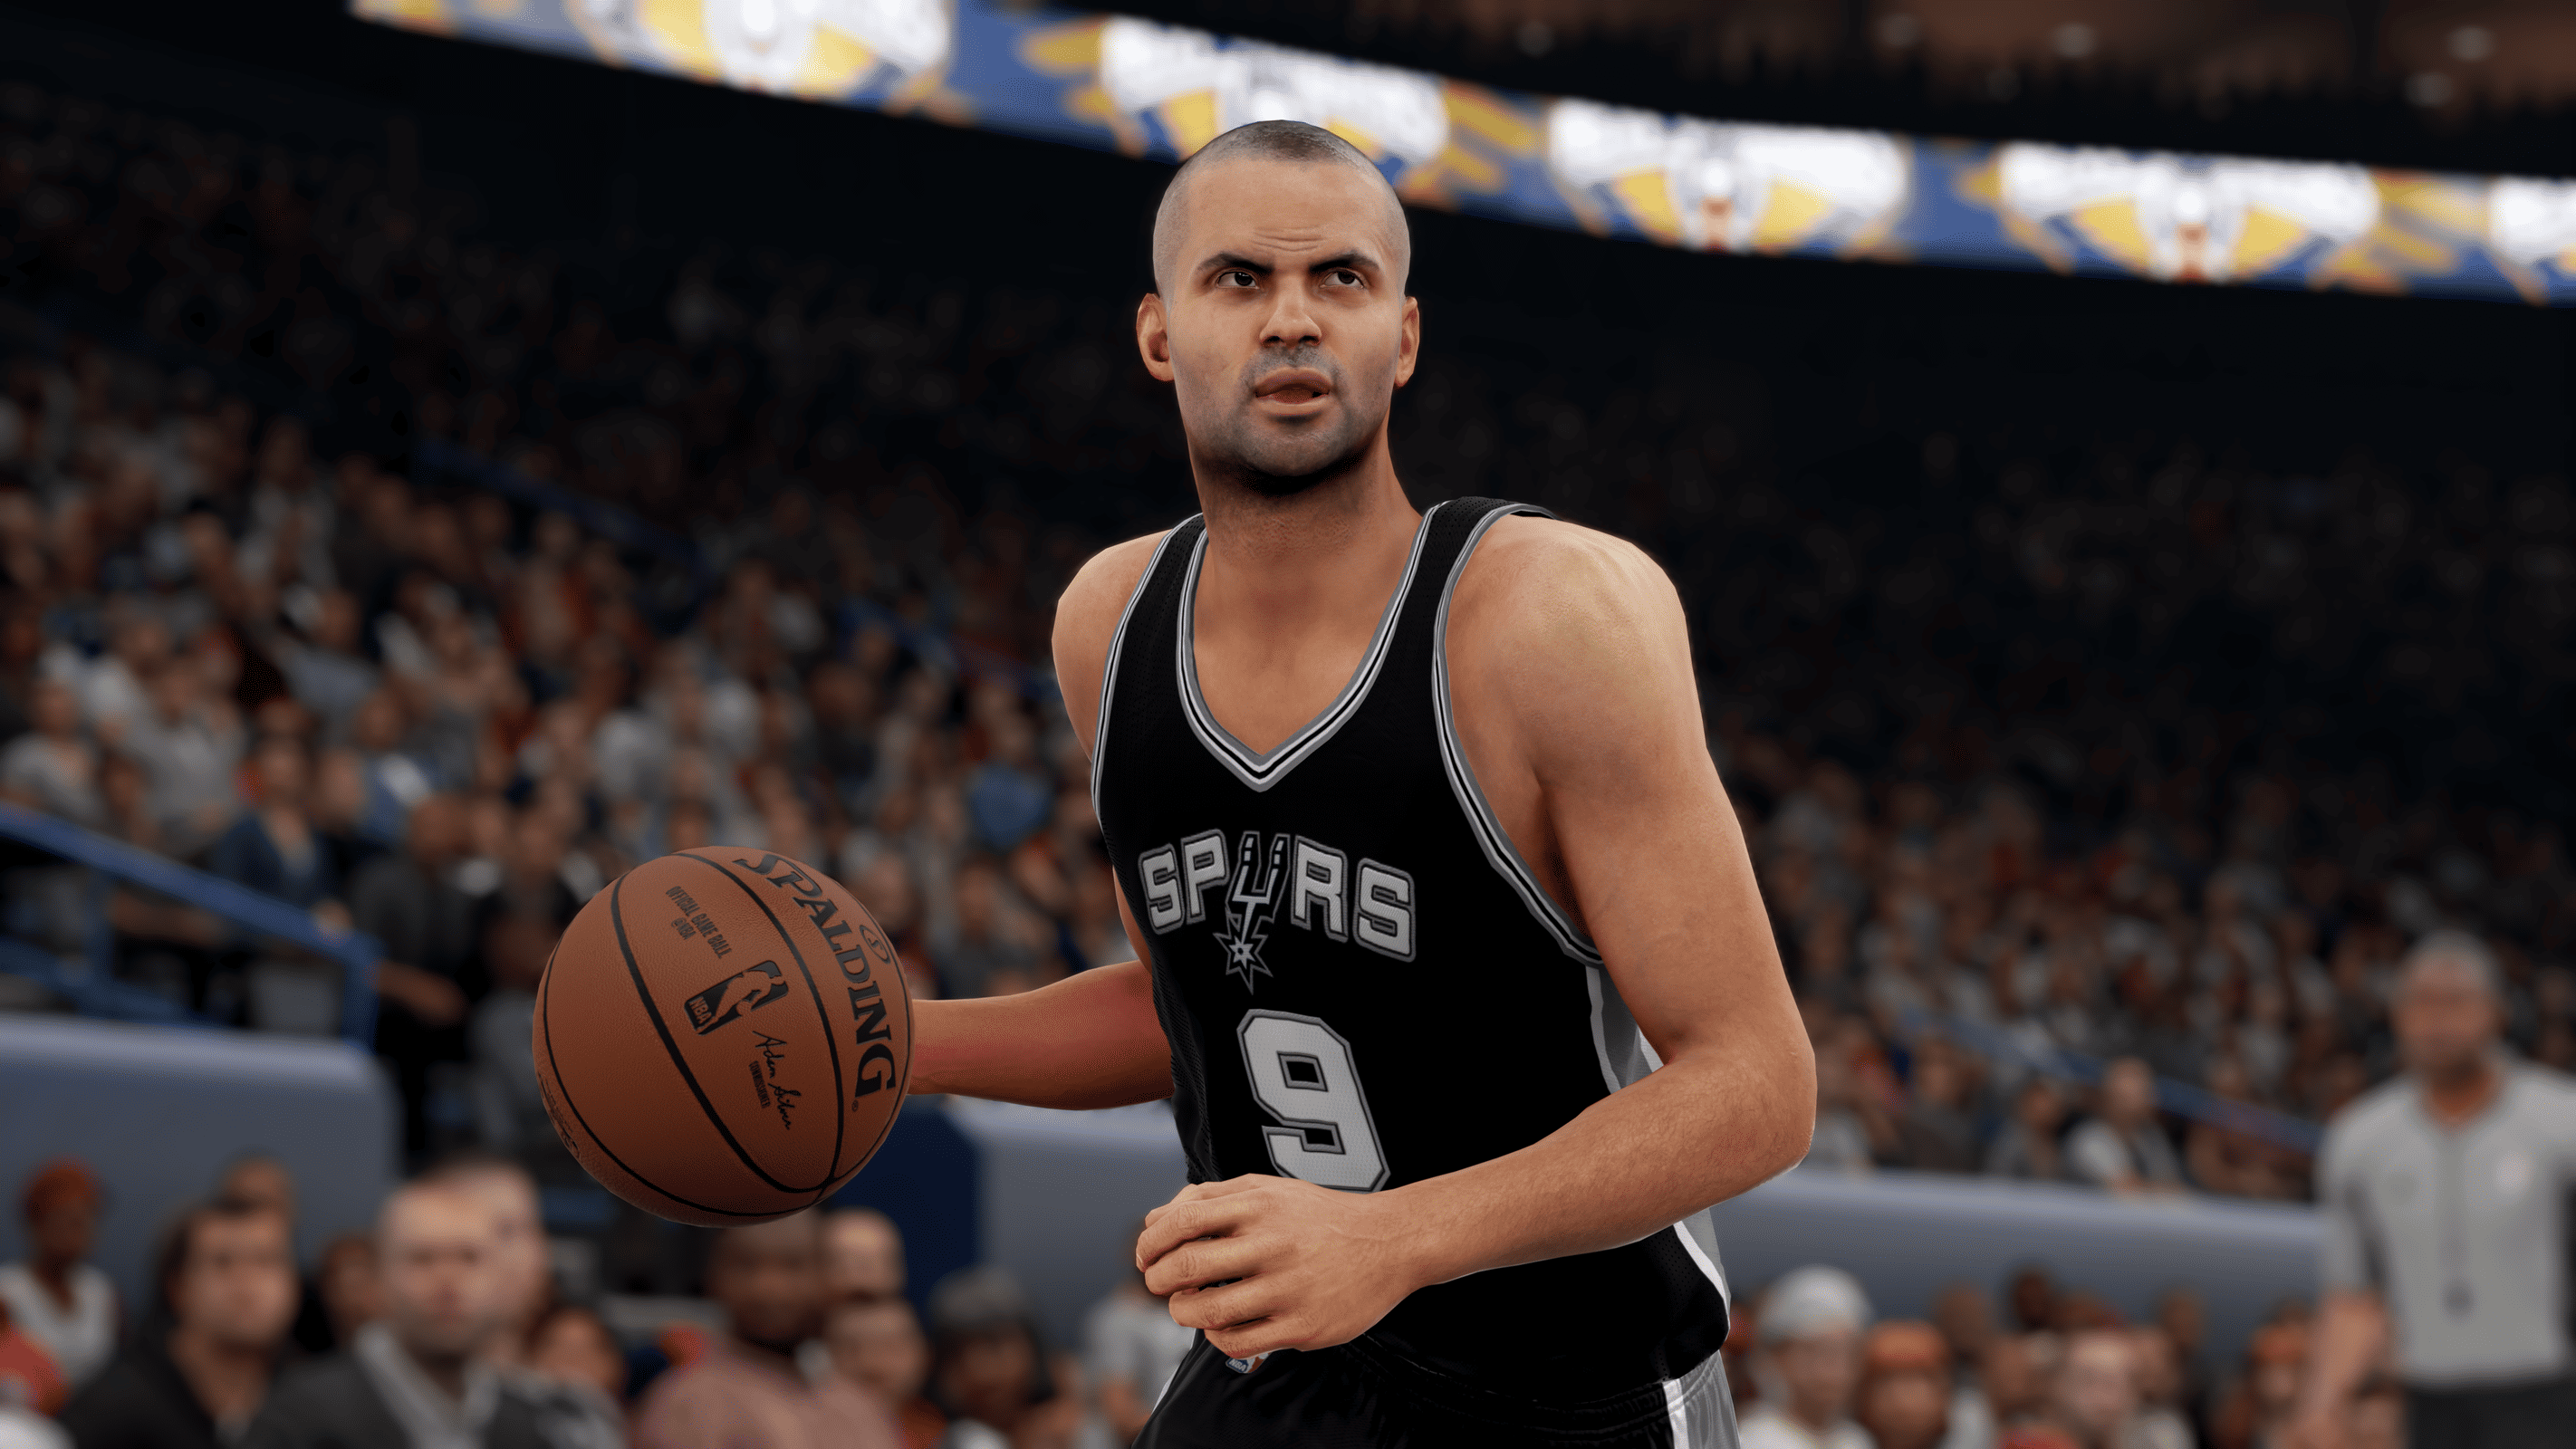 NBA 2K16 & Cheat Codes for Xbox, PlayStation, and PC - Code Central